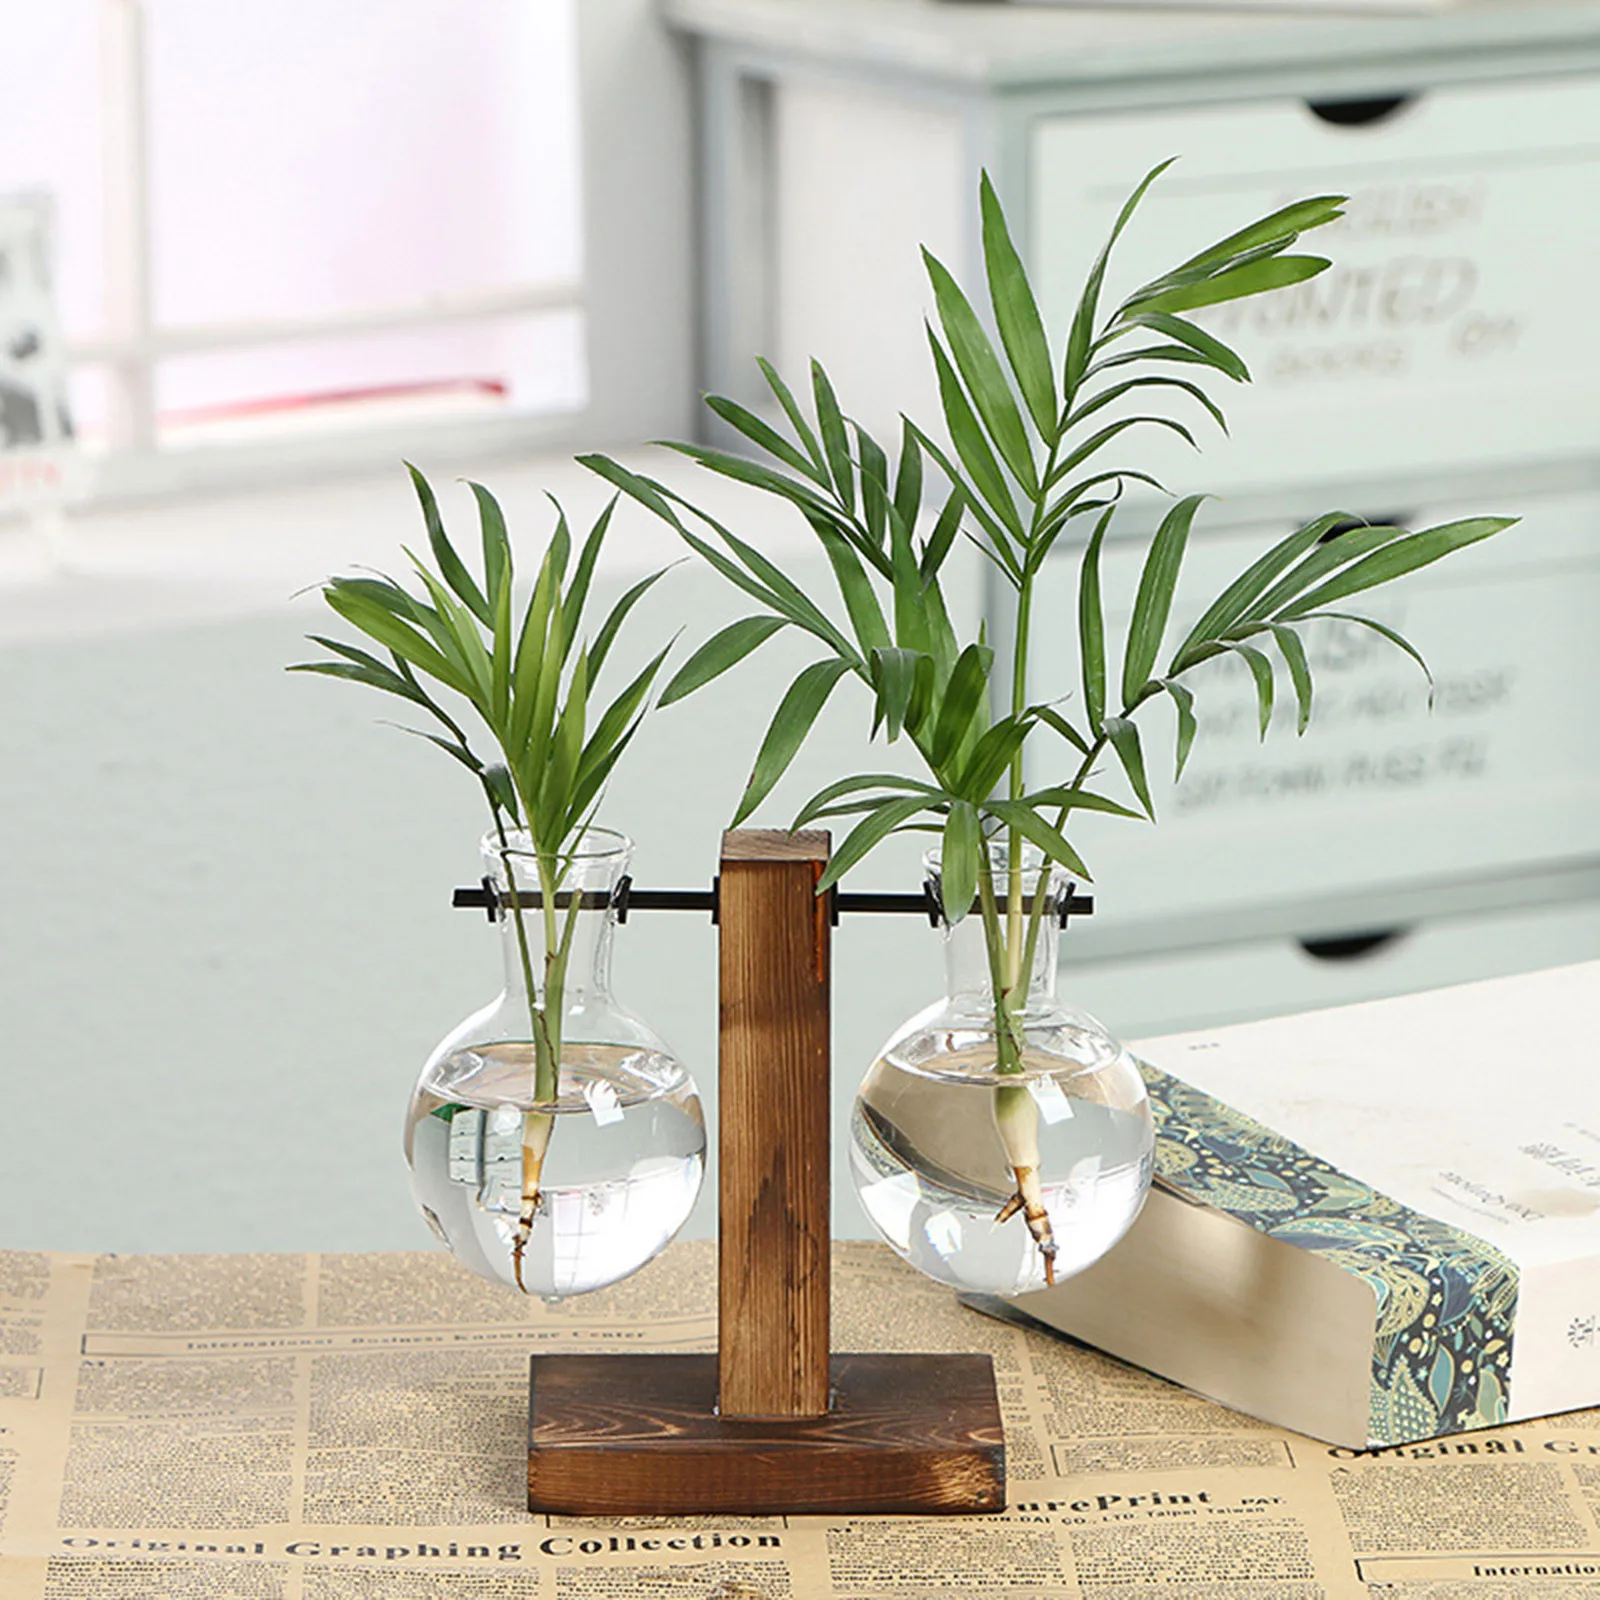 Feitore Desktop Plant Terrariums Glass Planter Bulb Vase Modern Propagation Station Hydroponic Vases with Retro Solid Wooden Stand for Hydroponics Plants Home Garden Wedding Decor 3 Vases